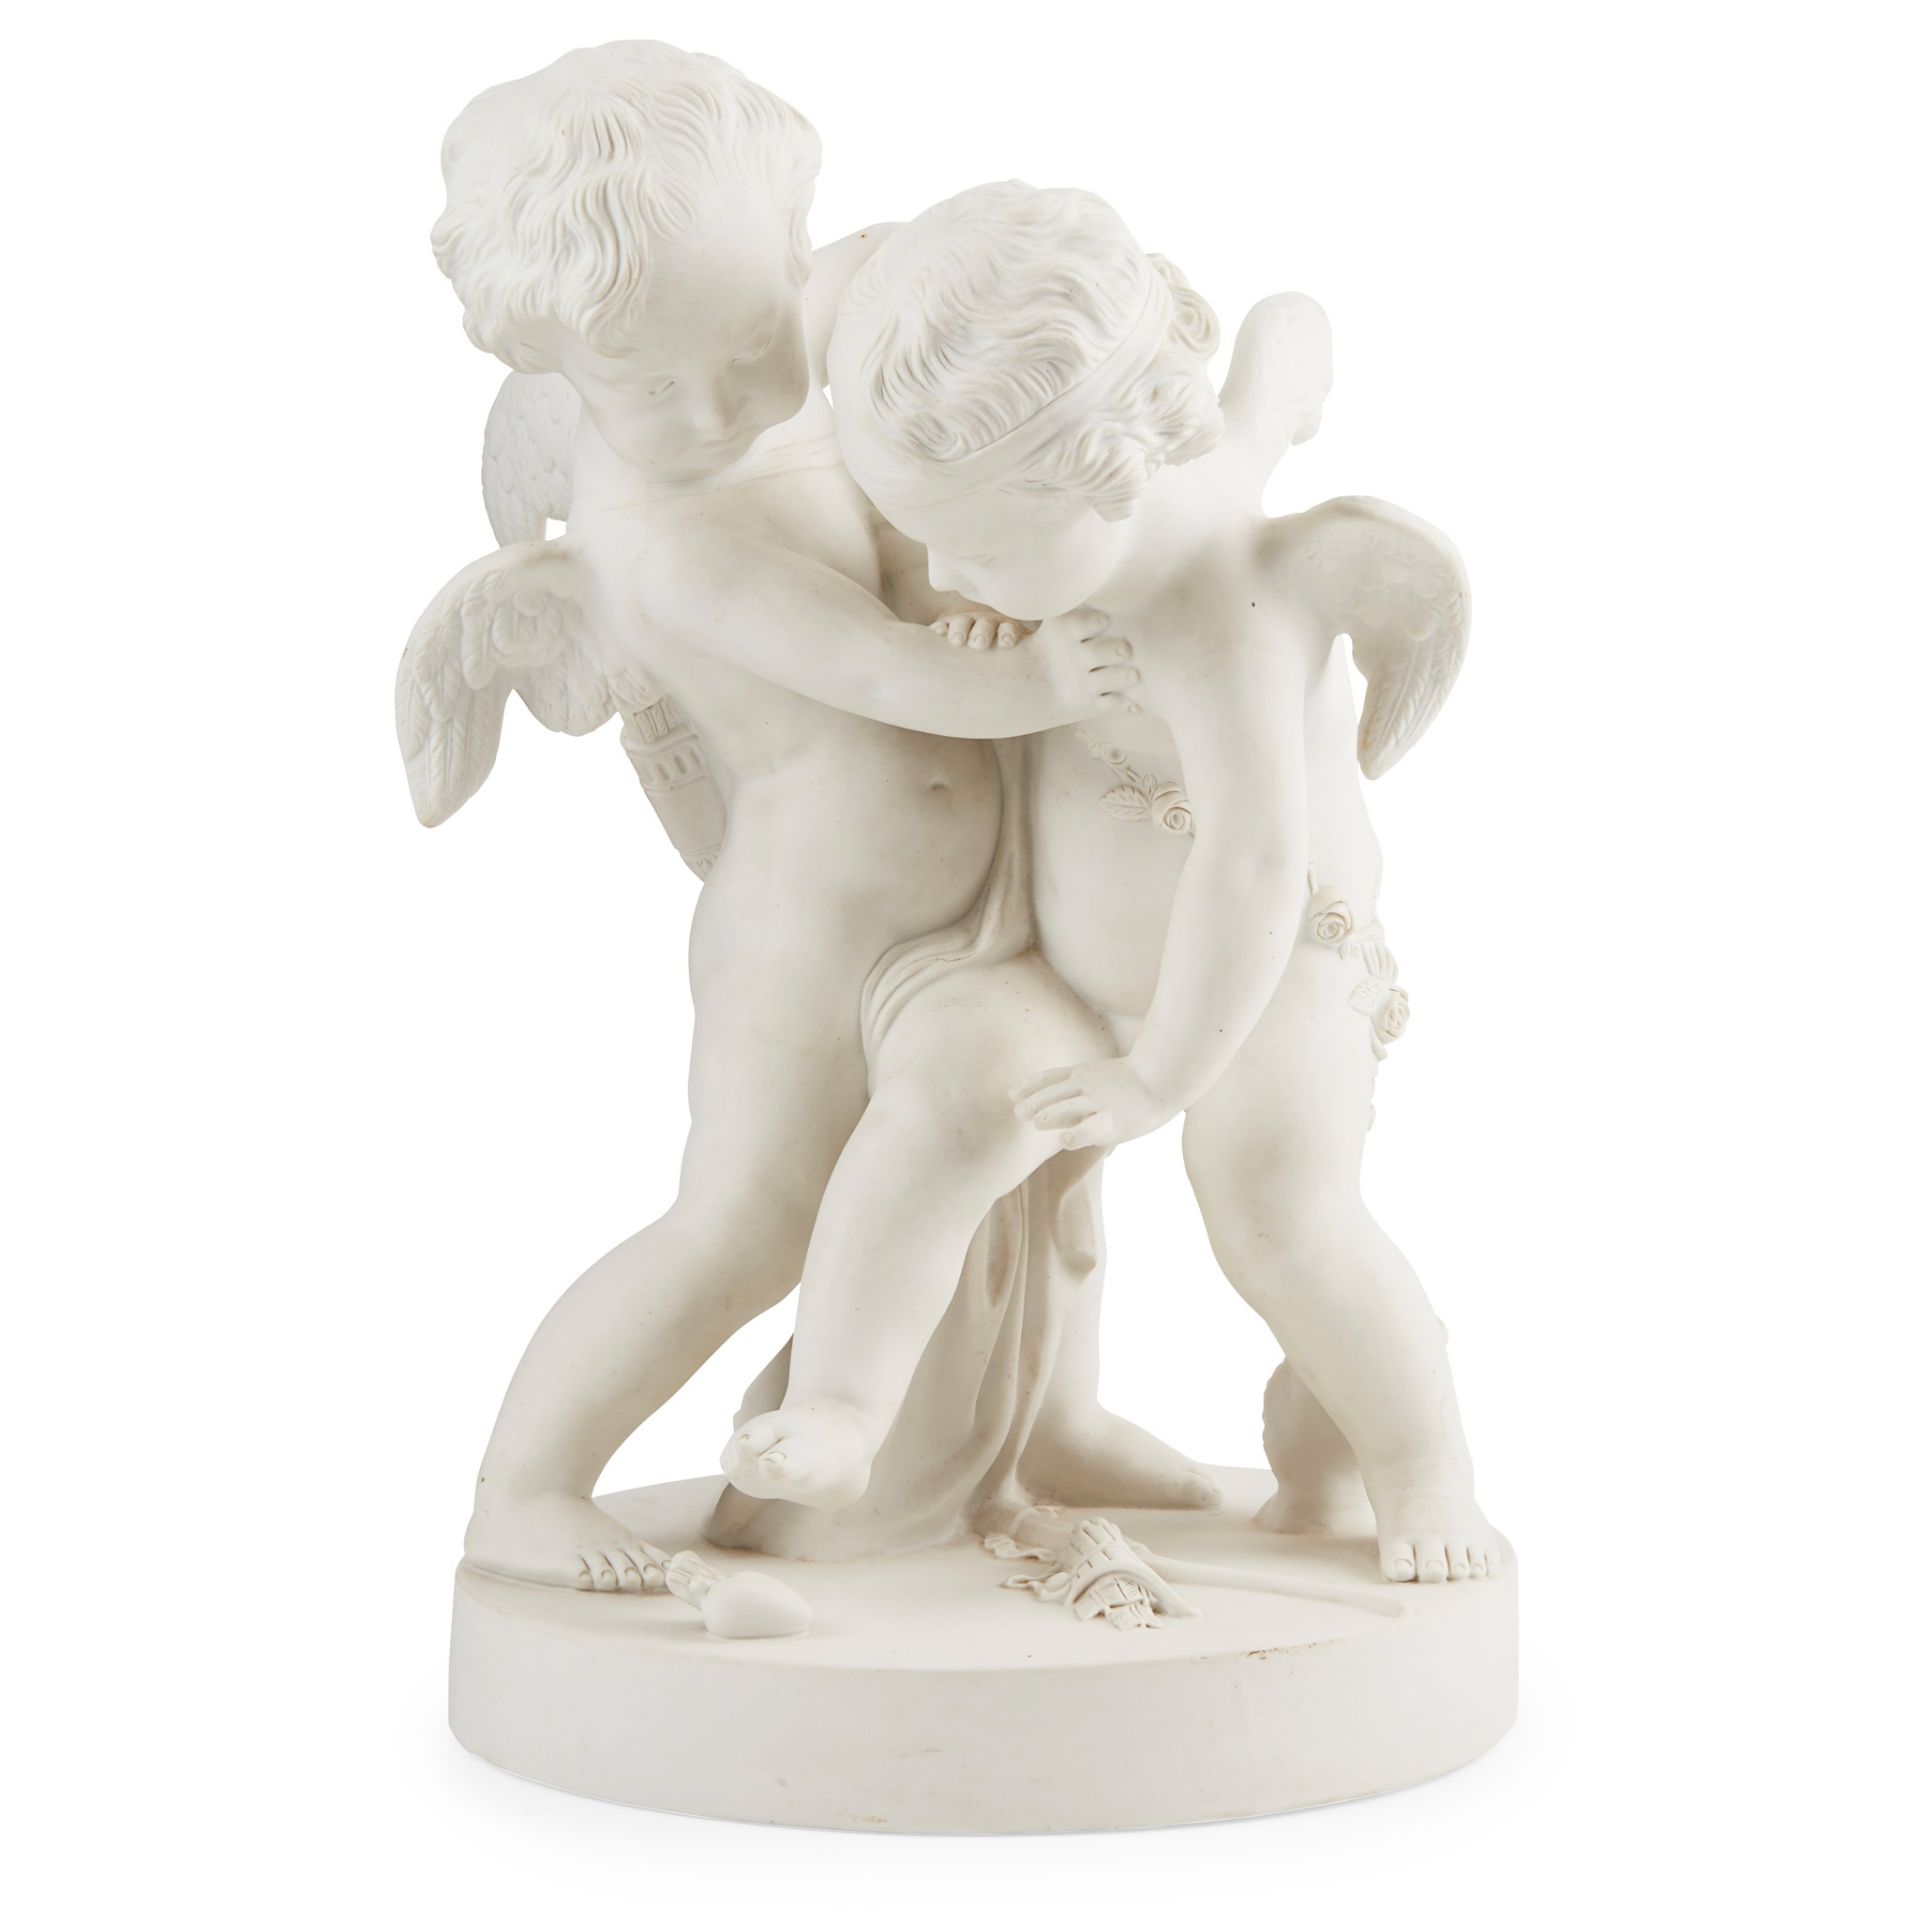 FRENCH BISQUE FIGURE GROUP, AFTER JEAN-BAPTISTE PIGALLE 19TH CENTURY